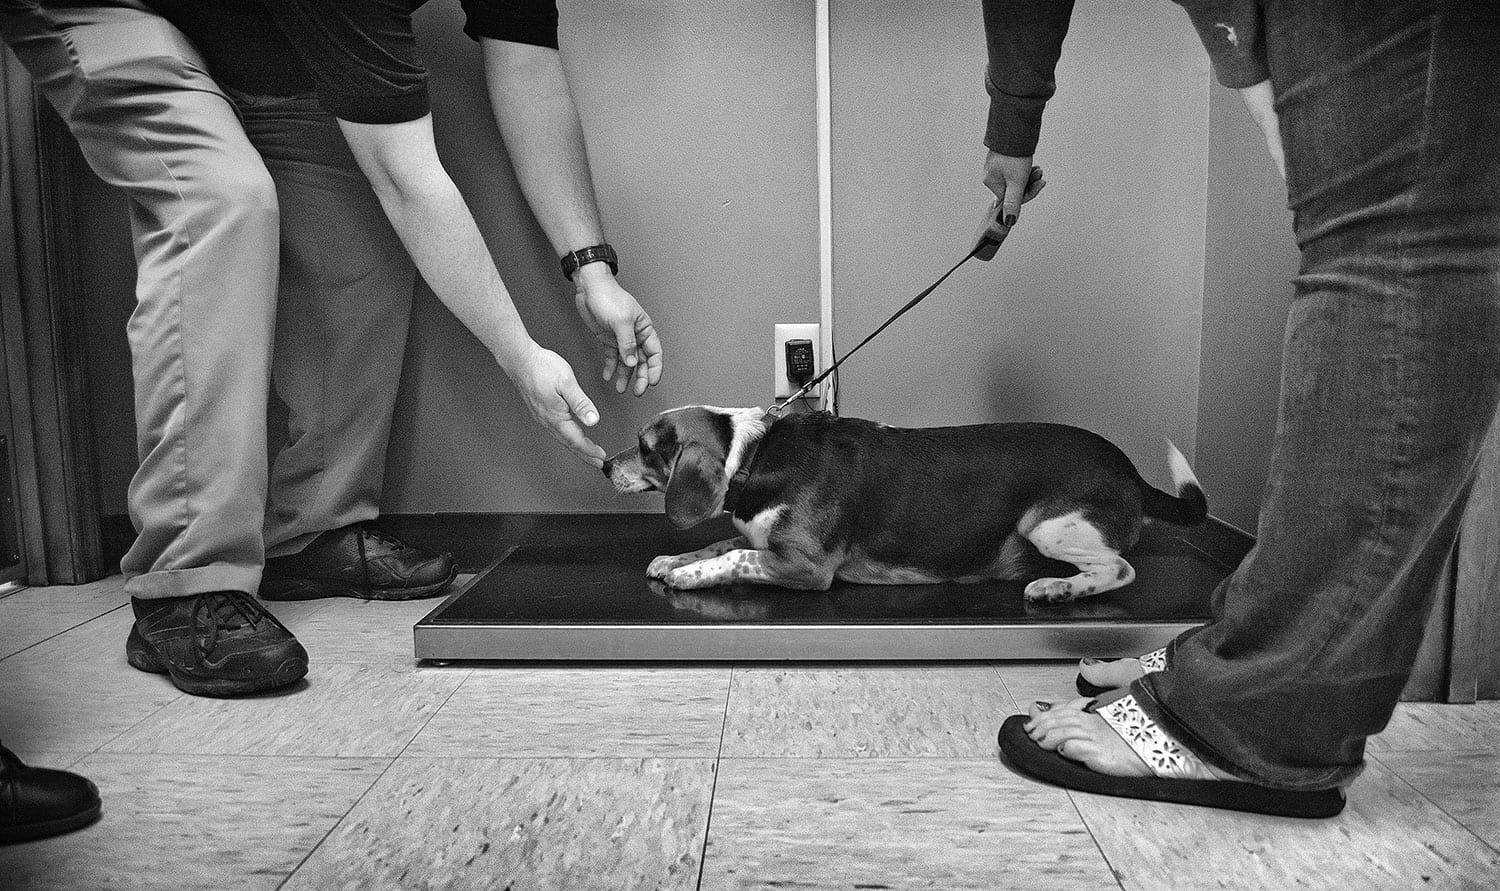 Kyle Johnson’s beagle, Samson, begins his checkup with a weigh-in. photo by Lauren Batson - 2017